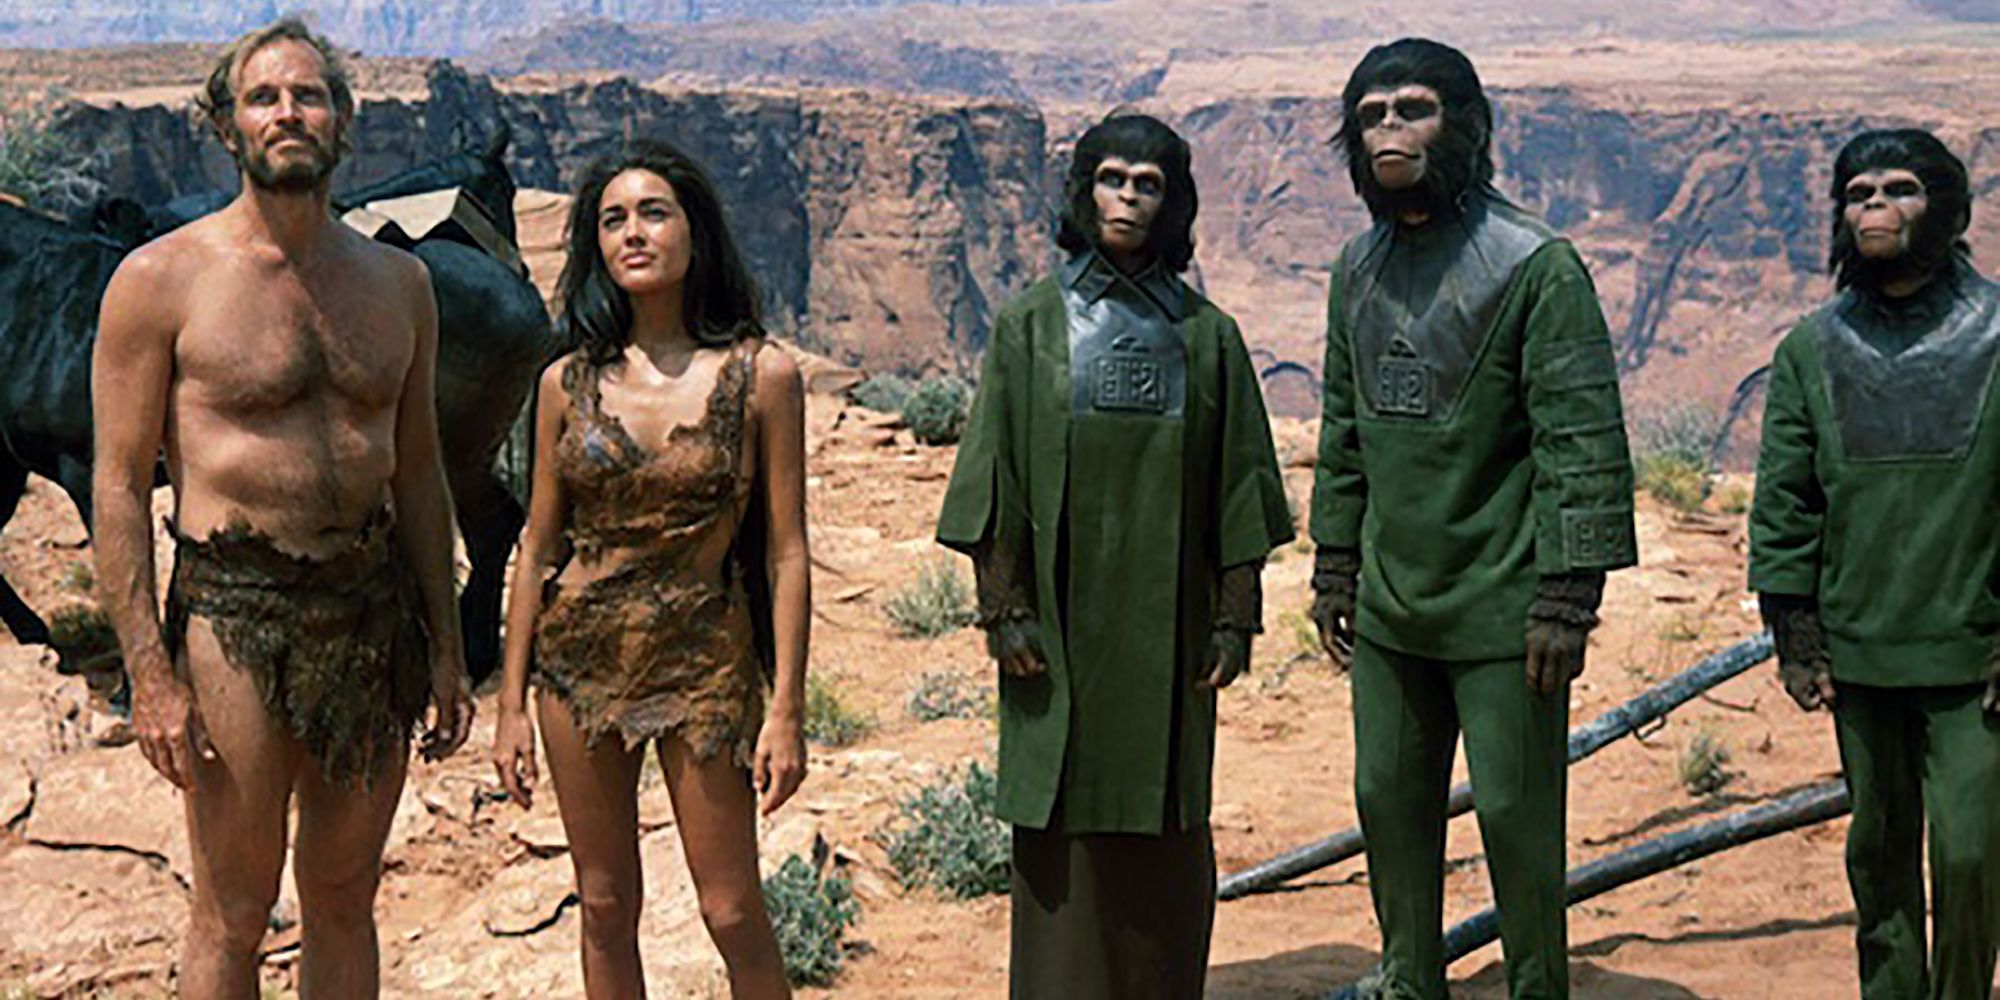 Planet Of The Apes 1968